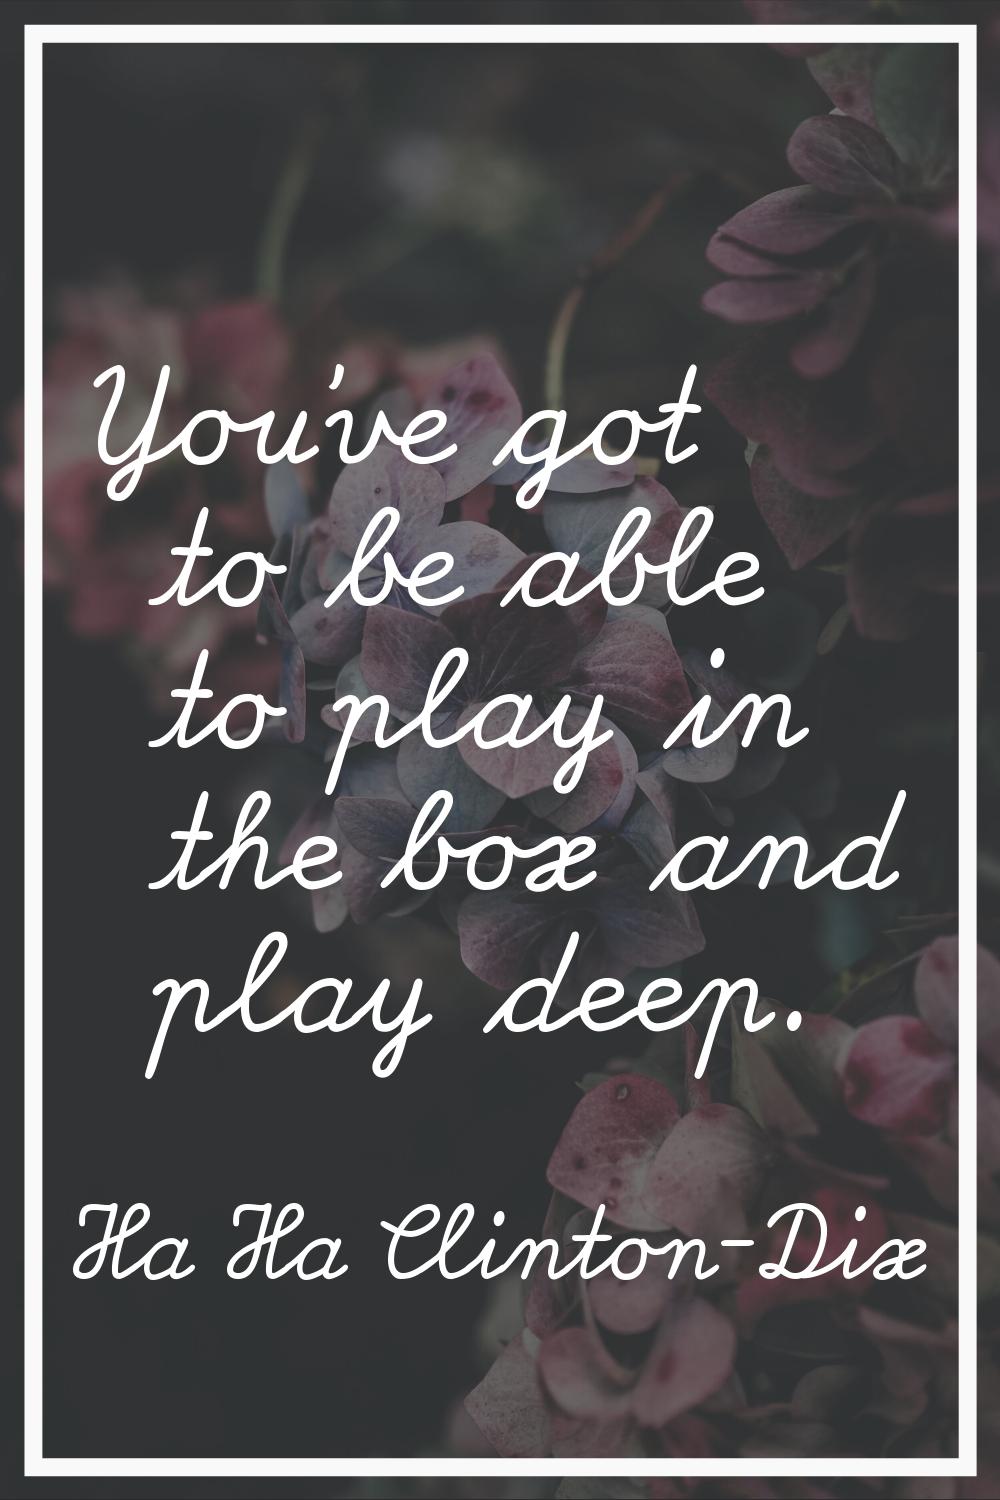 You've got to be able to play in the box and play deep.